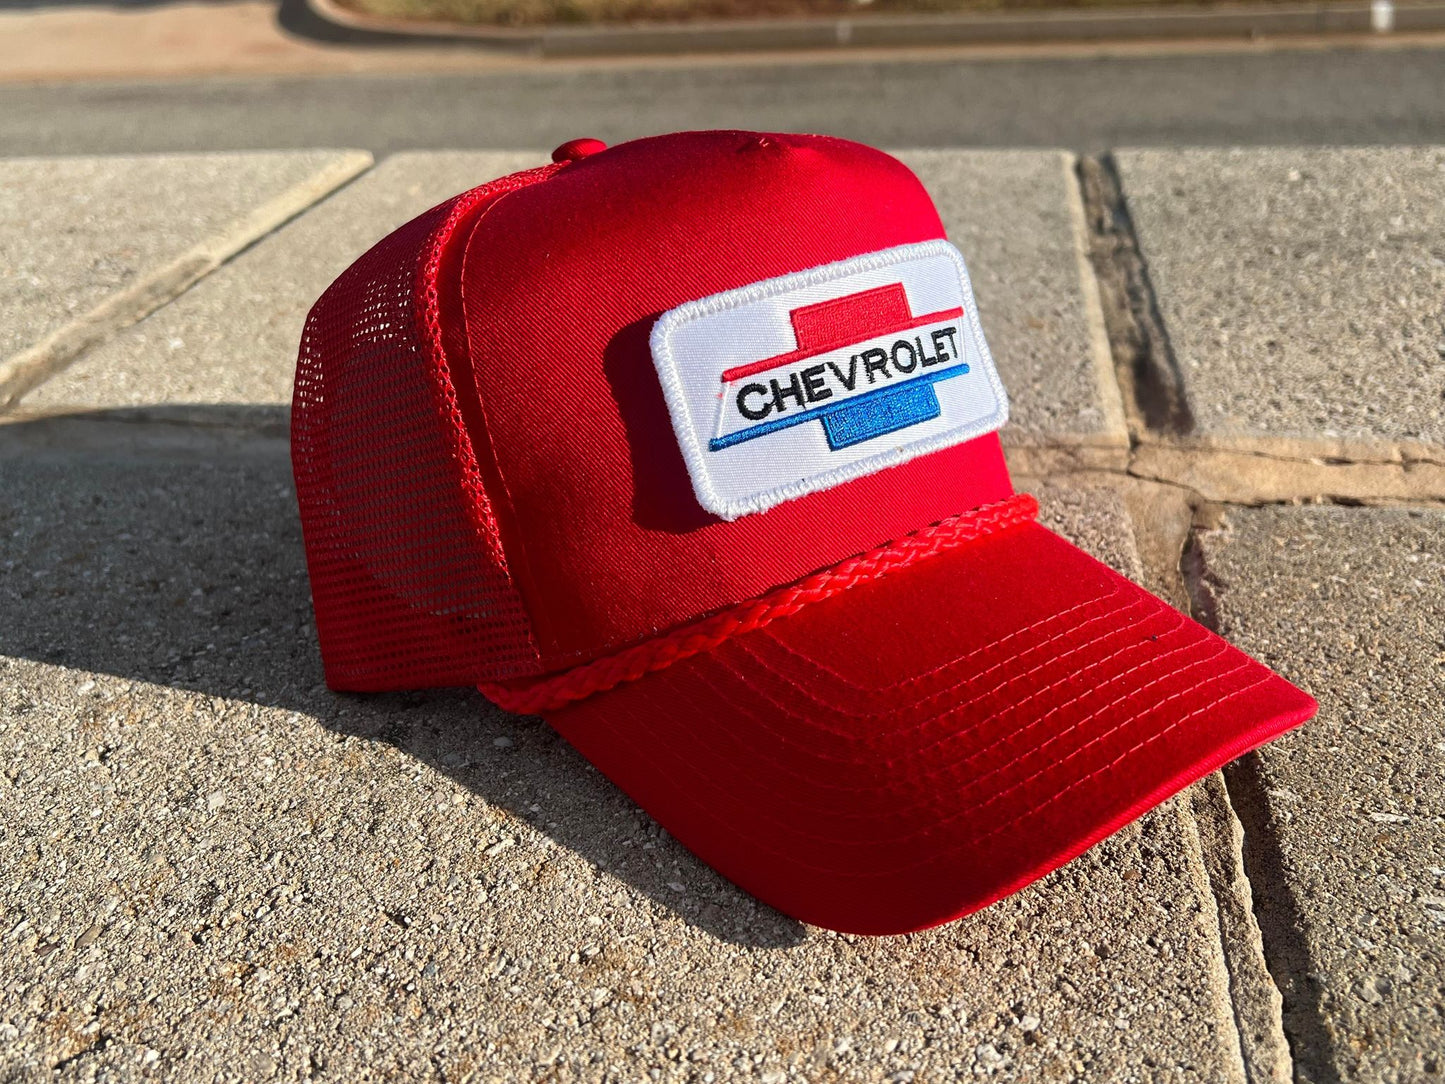 Vintage Chevrolet Rope Snapback Trucker Mesh Hat with Chevy Patch - Classic Chevy Truck Apparel for Men and Women